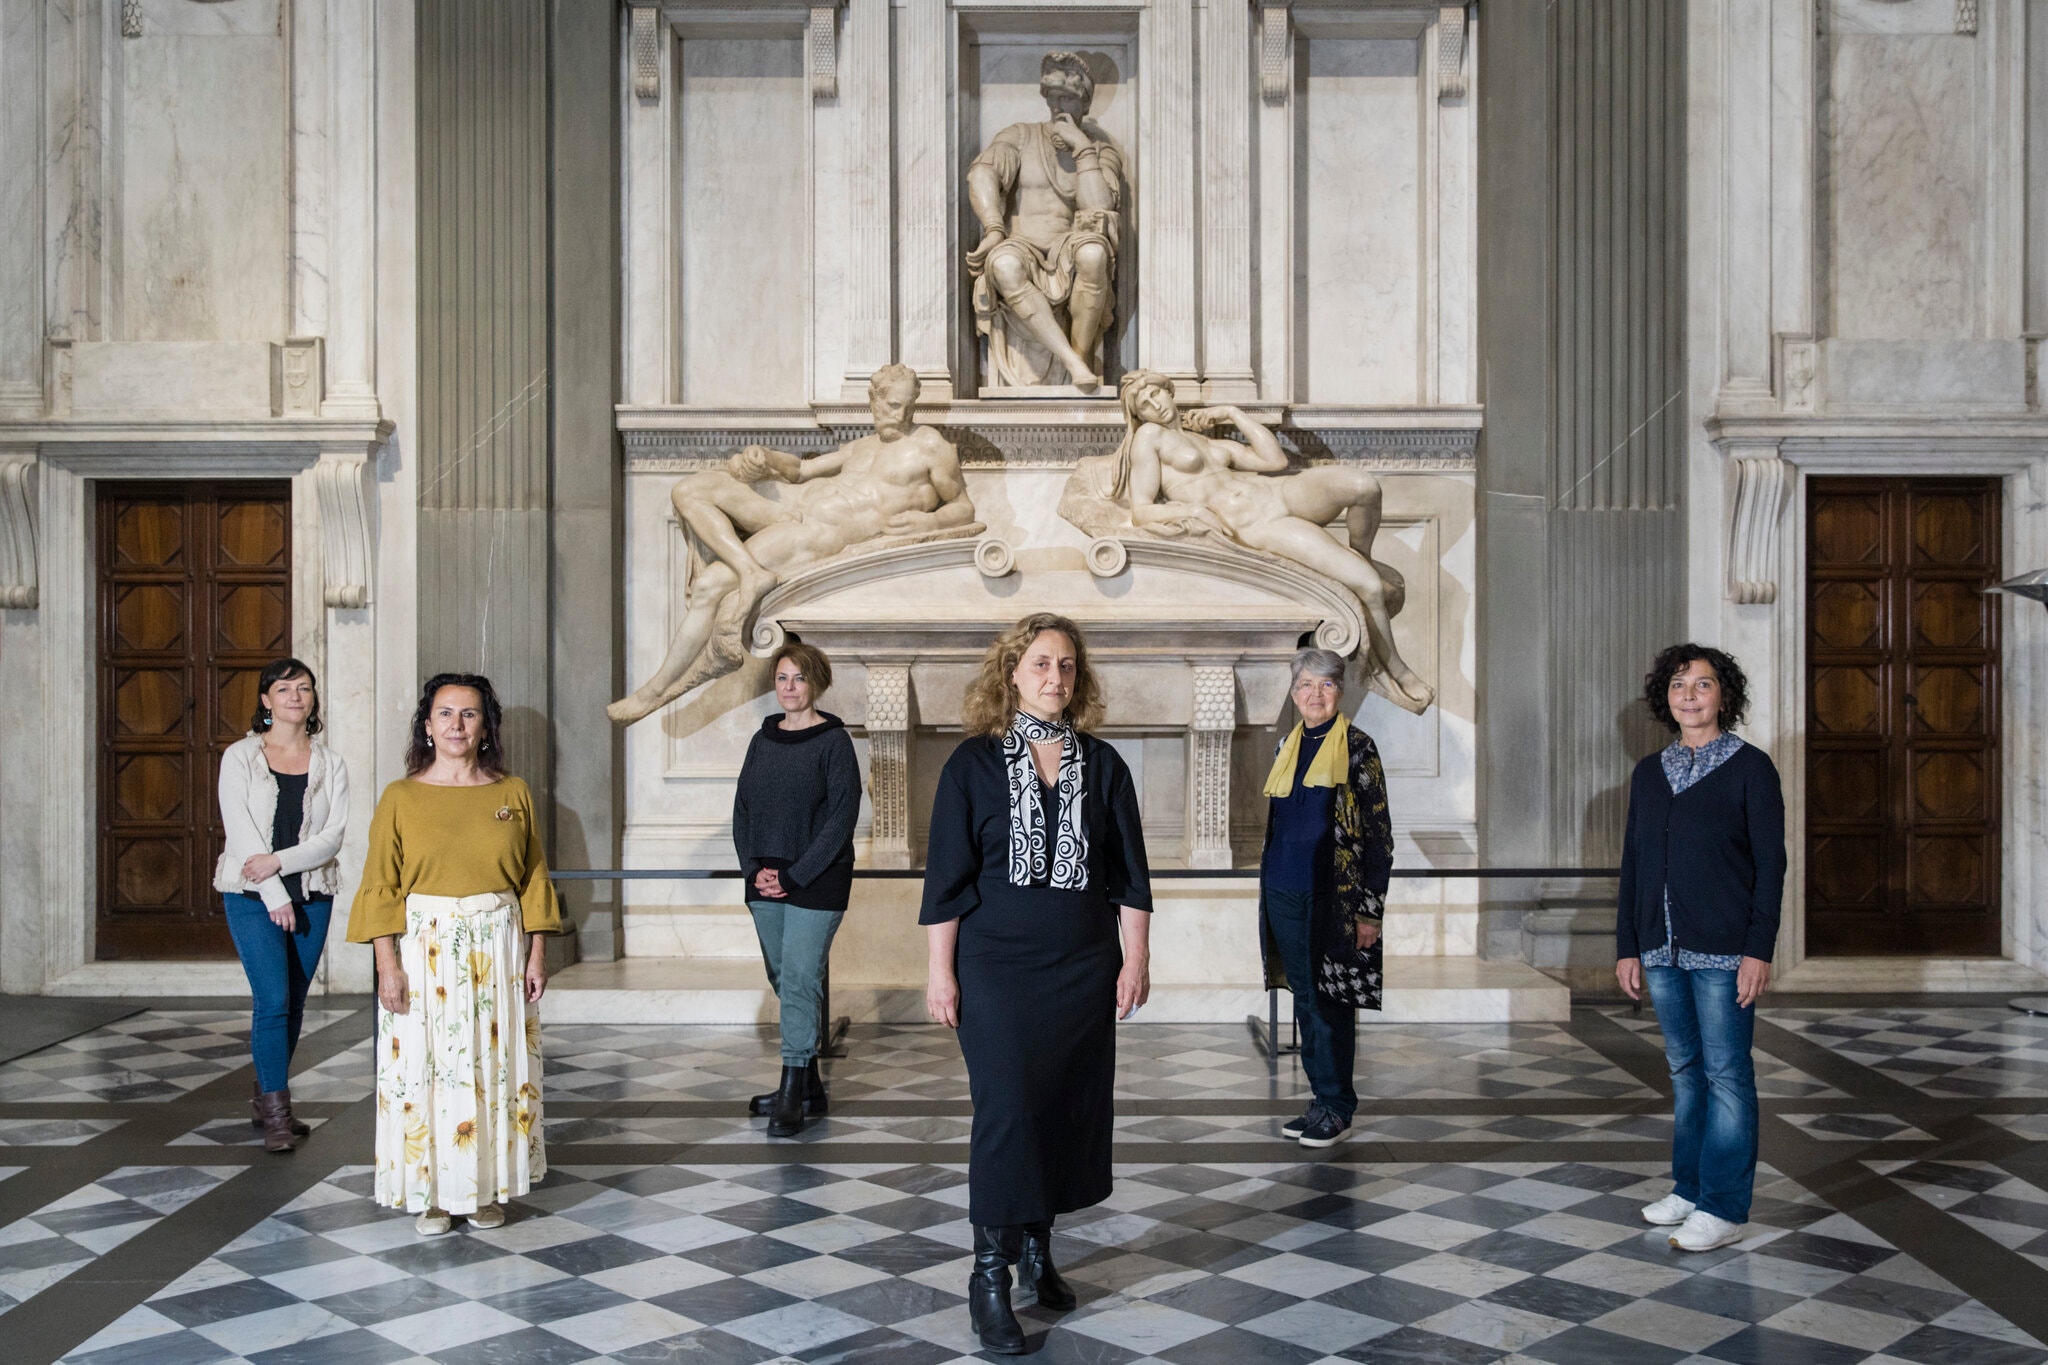 In an ornate, marble hall, with columns and carved statues against the far back wall, six light-skinned woman stand spaced out from one another in a zig/zag pattern. Some wear jeans an sneakers, other are in dresses with boots. They all stare directly at the camera.